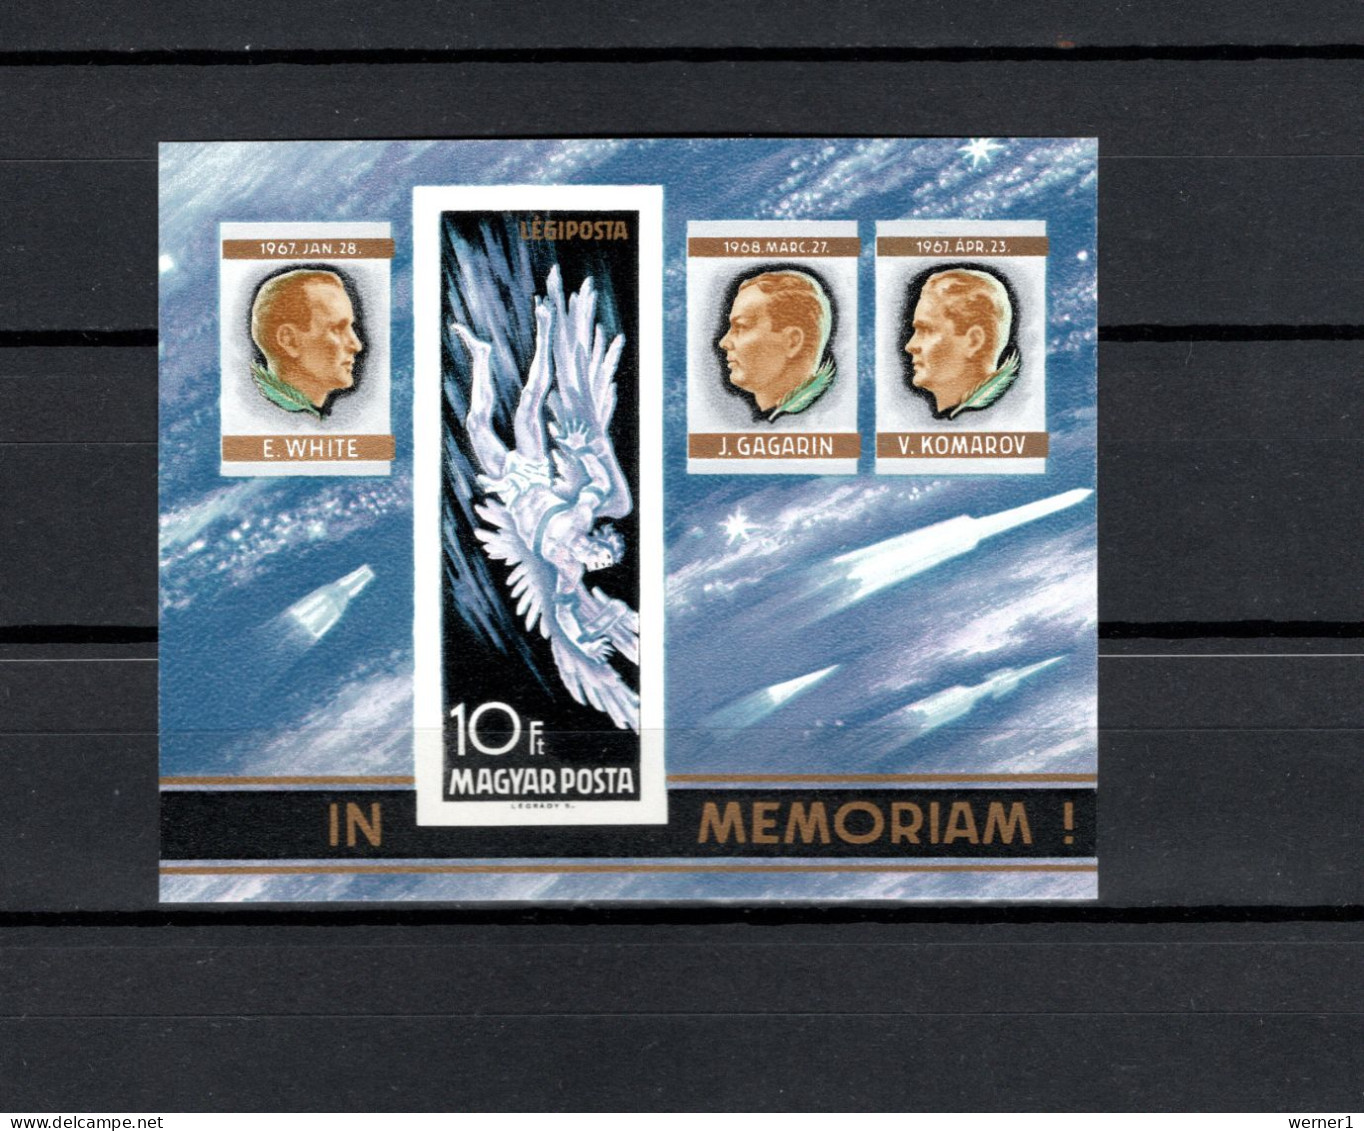 Hungary 1968 Space, Dead Cosmonauts And Astronauts, E.White, Y.Gagarin, V.Komarov S/s Imperf. MNH -scarce- - Europa